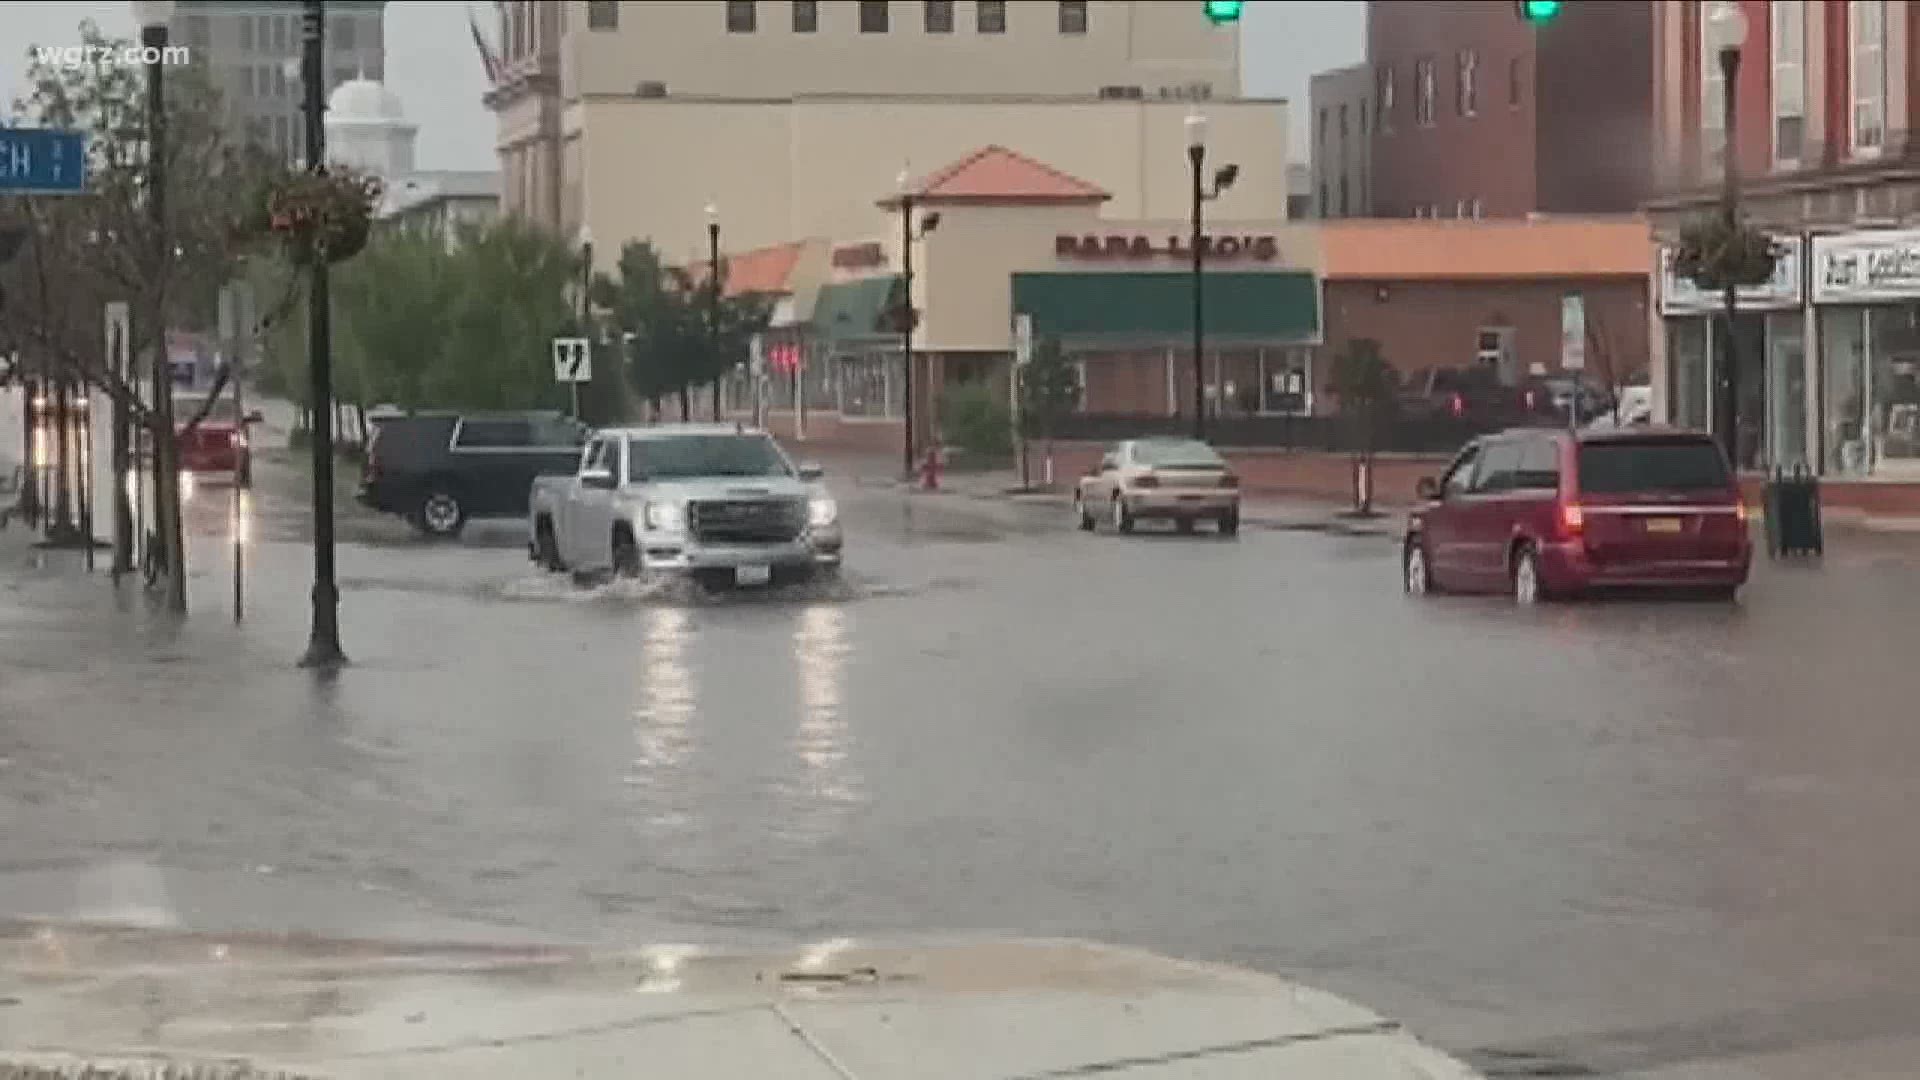 Flash flooding from Tuesday's storm caused headaches for businesses, residents and drivers.